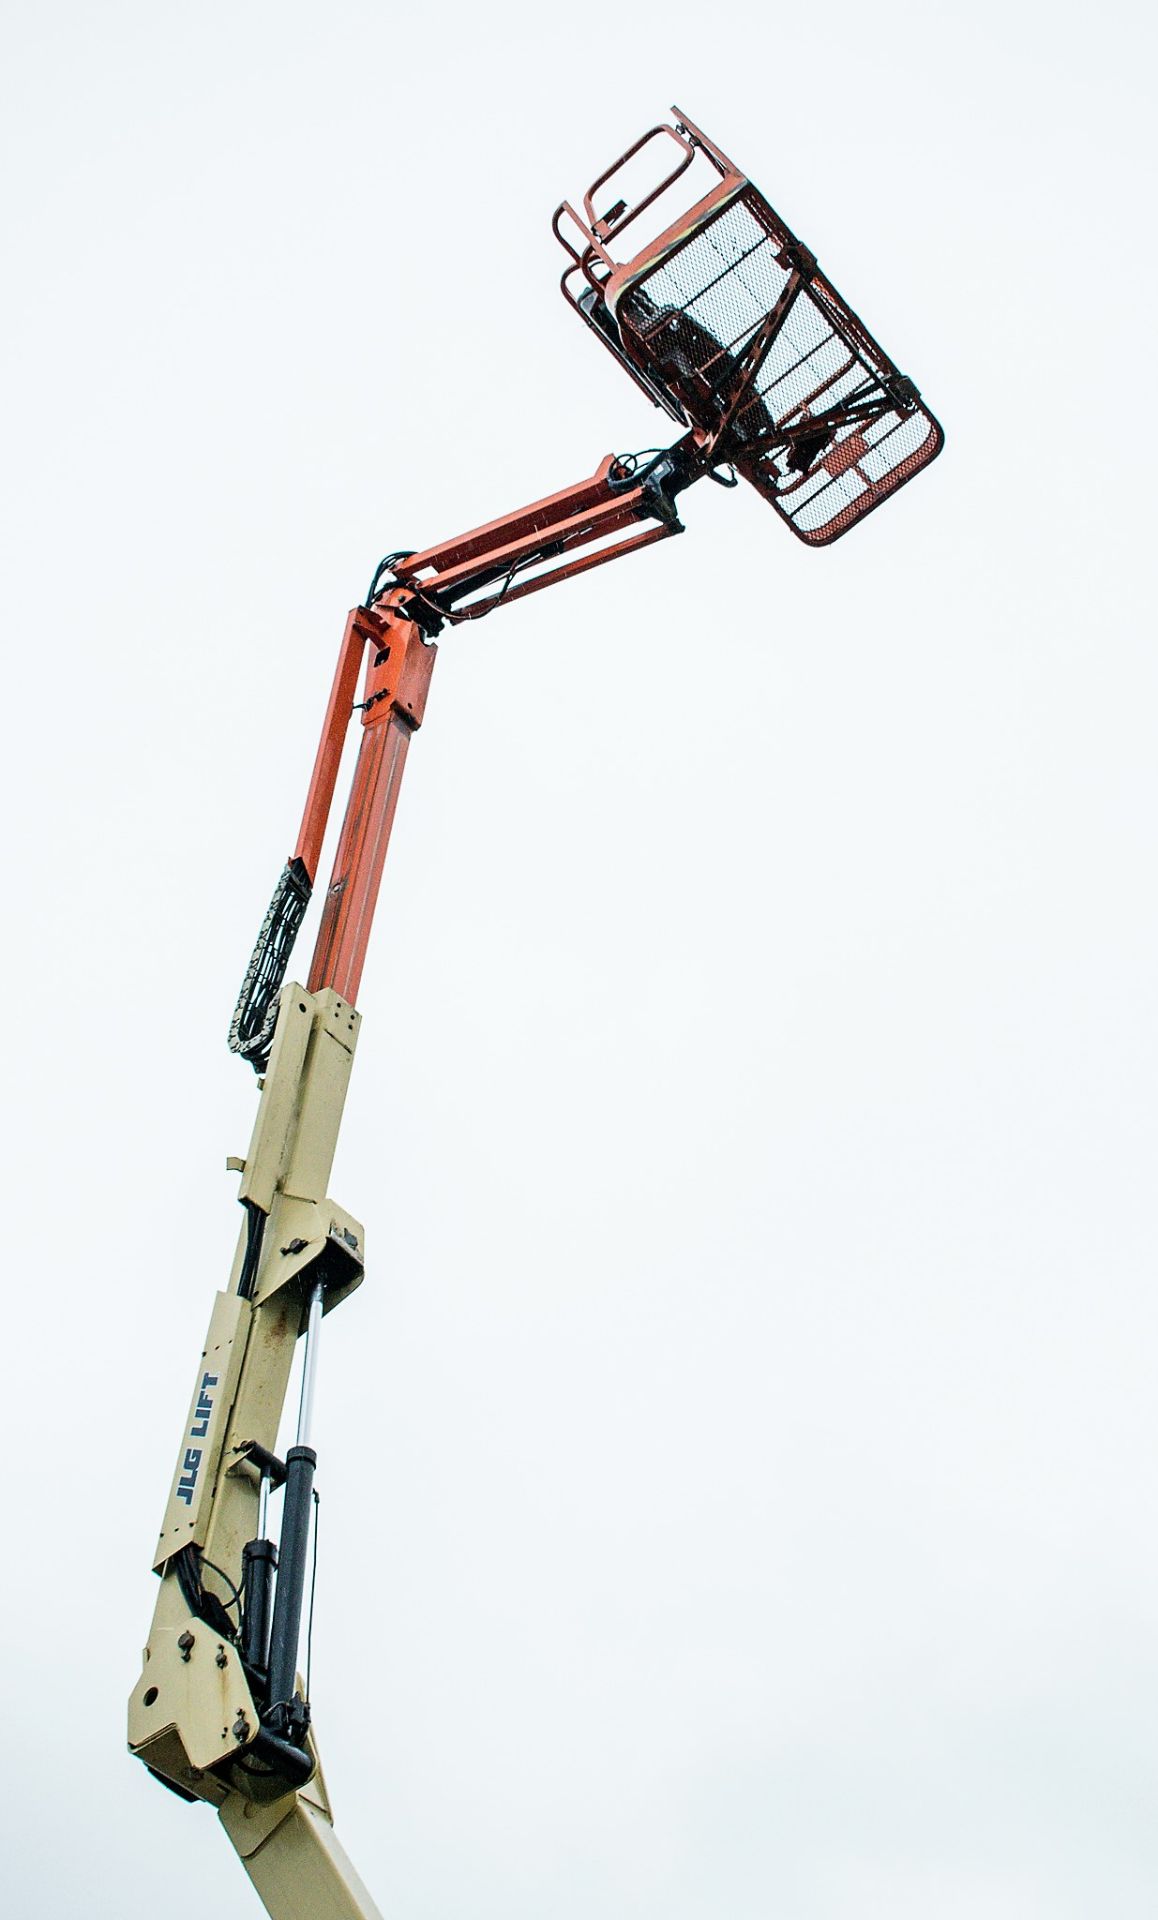 JLG M450 AJ 45 ft battery electric/diesel articulated boom lift access platform Year: 2005 S/N: - Image 10 of 15